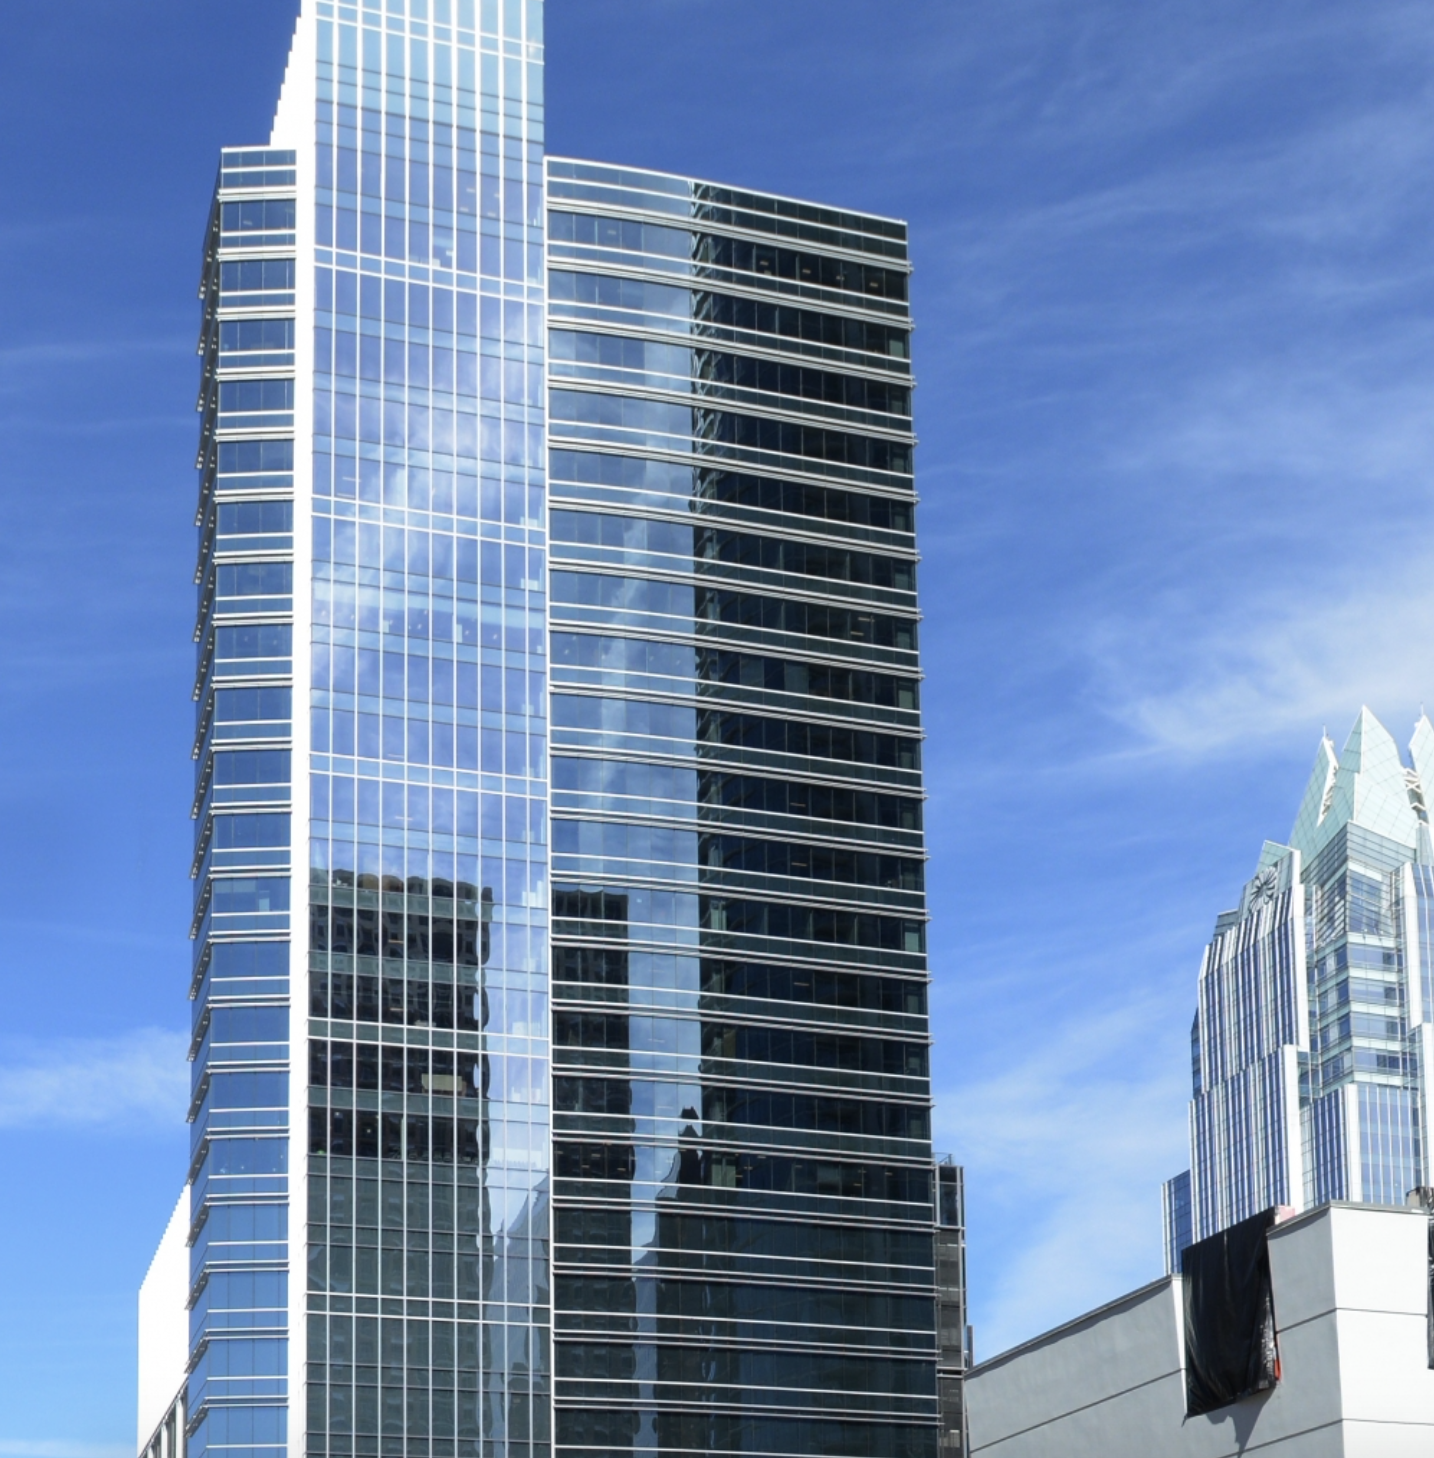 Miro will lease floors 17, 18 and 19 of Colorado Tower in downtown Austin.